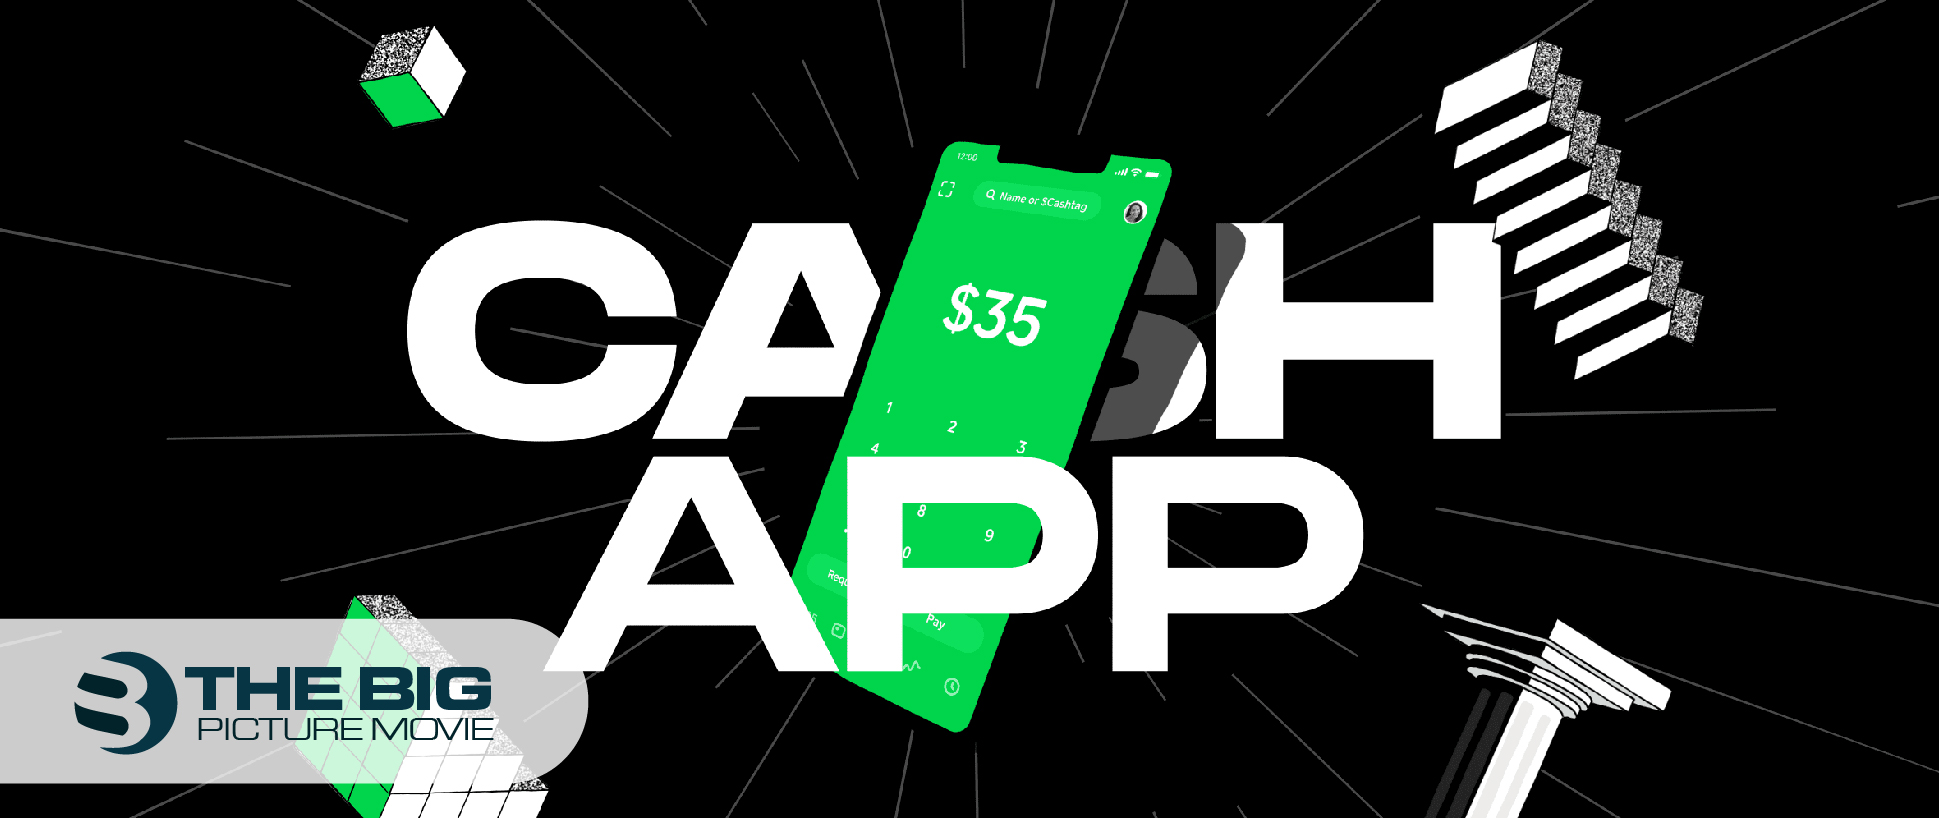 How to Withdraw Bitcoin on Cash App in Few Steps